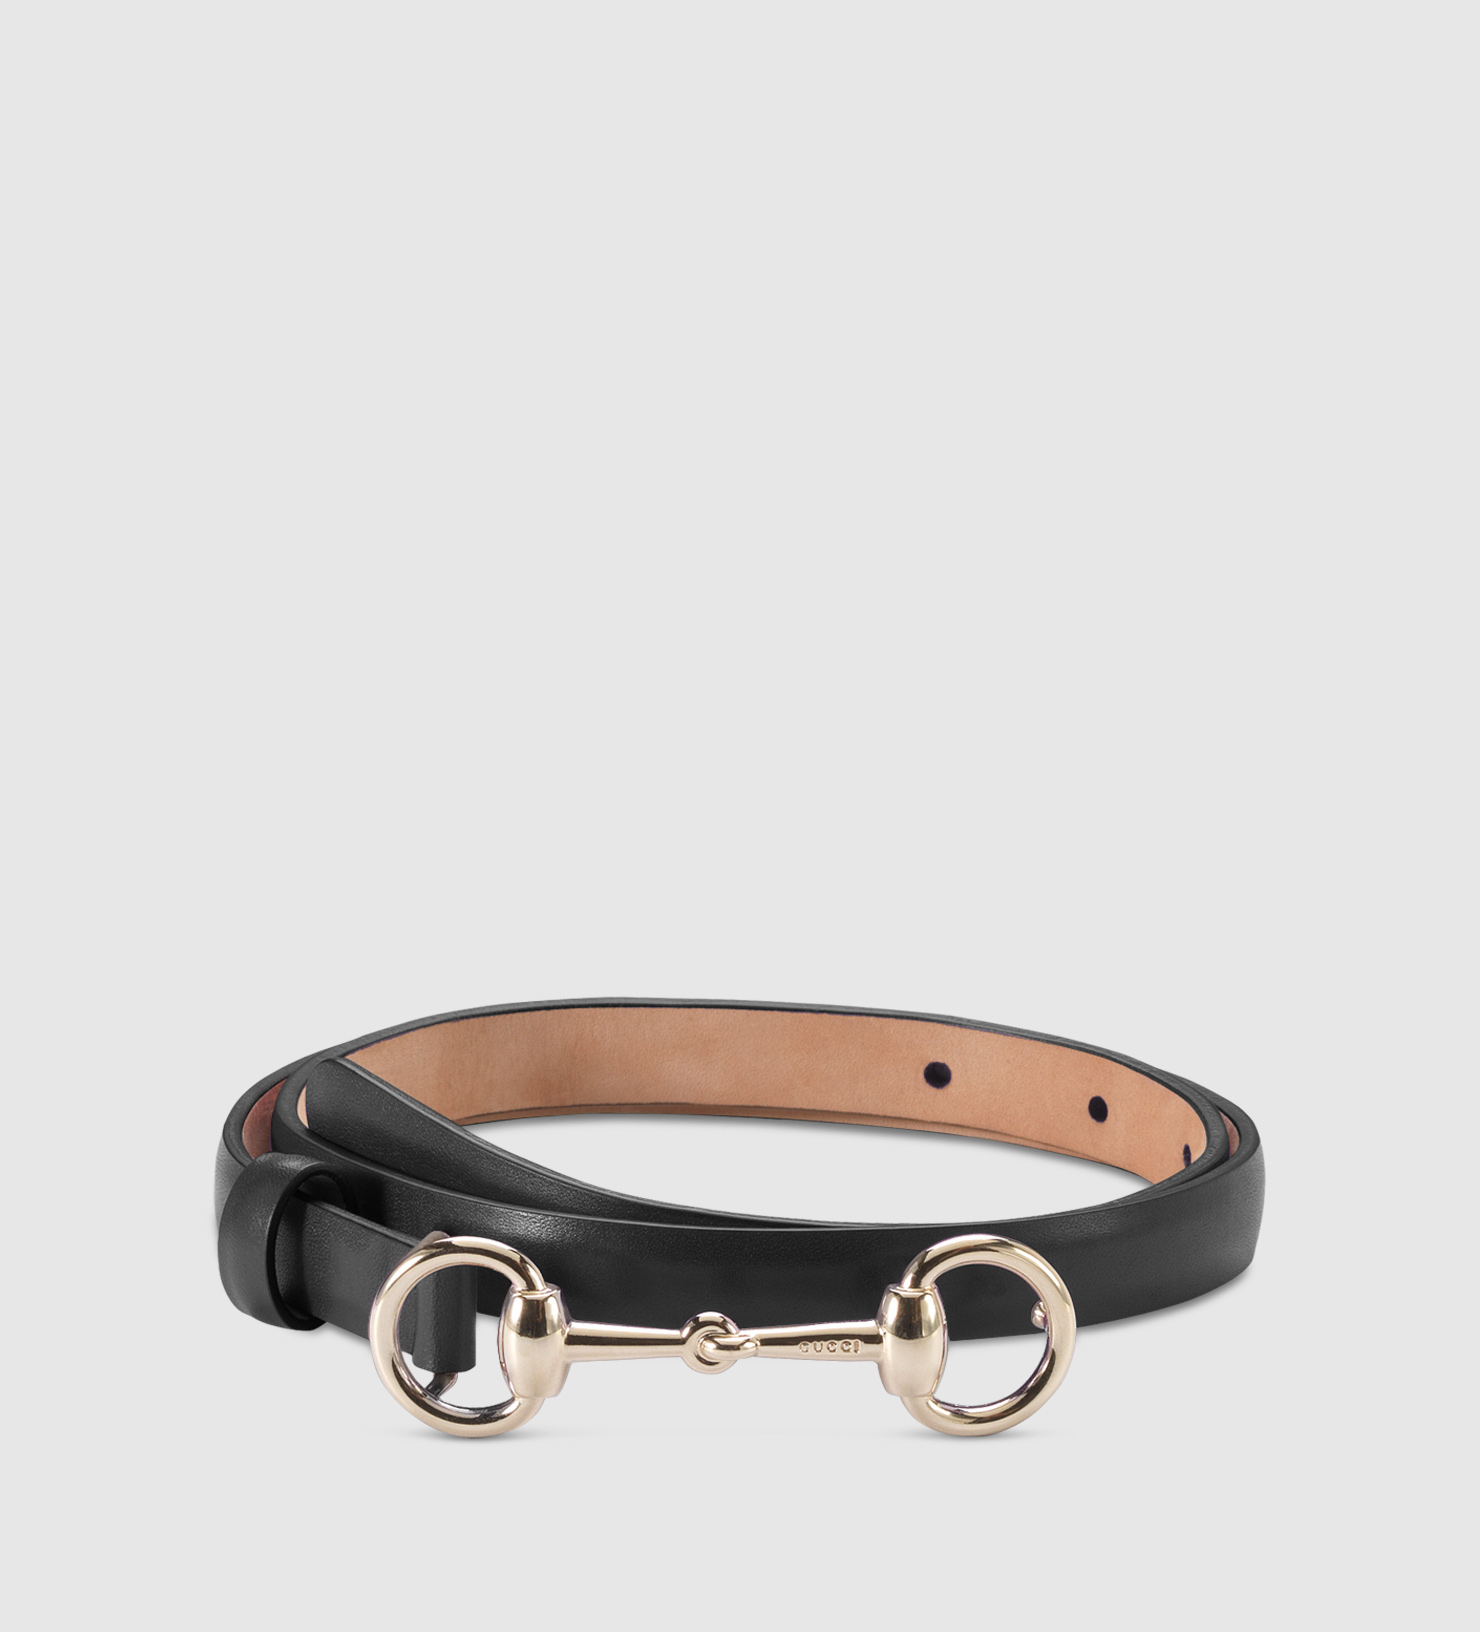 Gucci Leather Skinny Belt With Horsebit Buckle in Black | Lyst